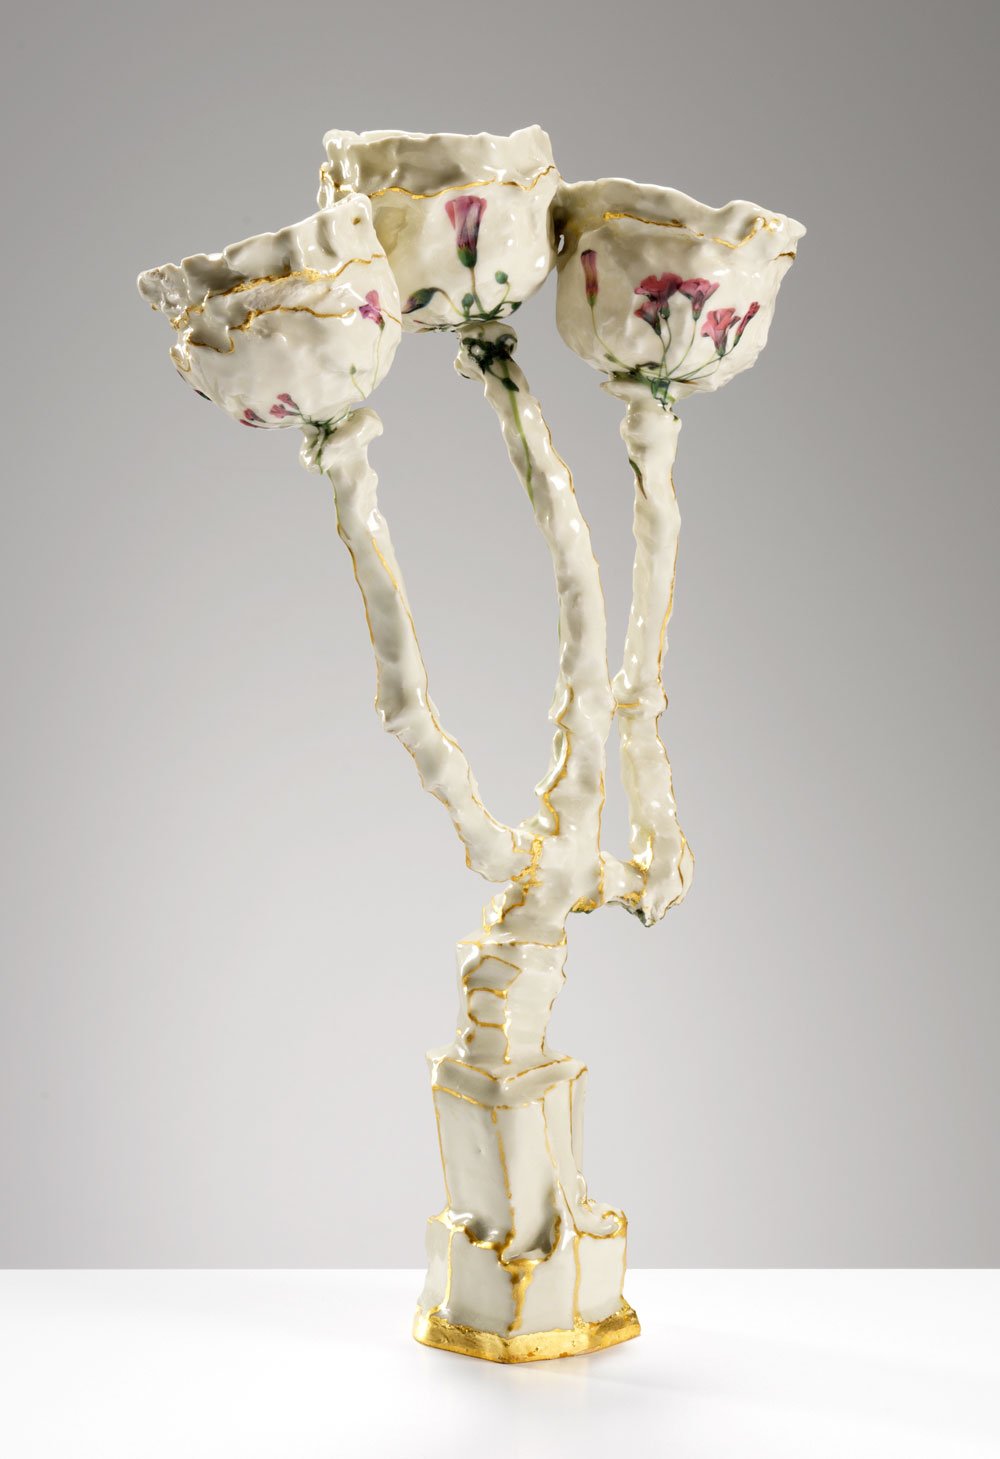 Triple Candelabra with Pink Flowers